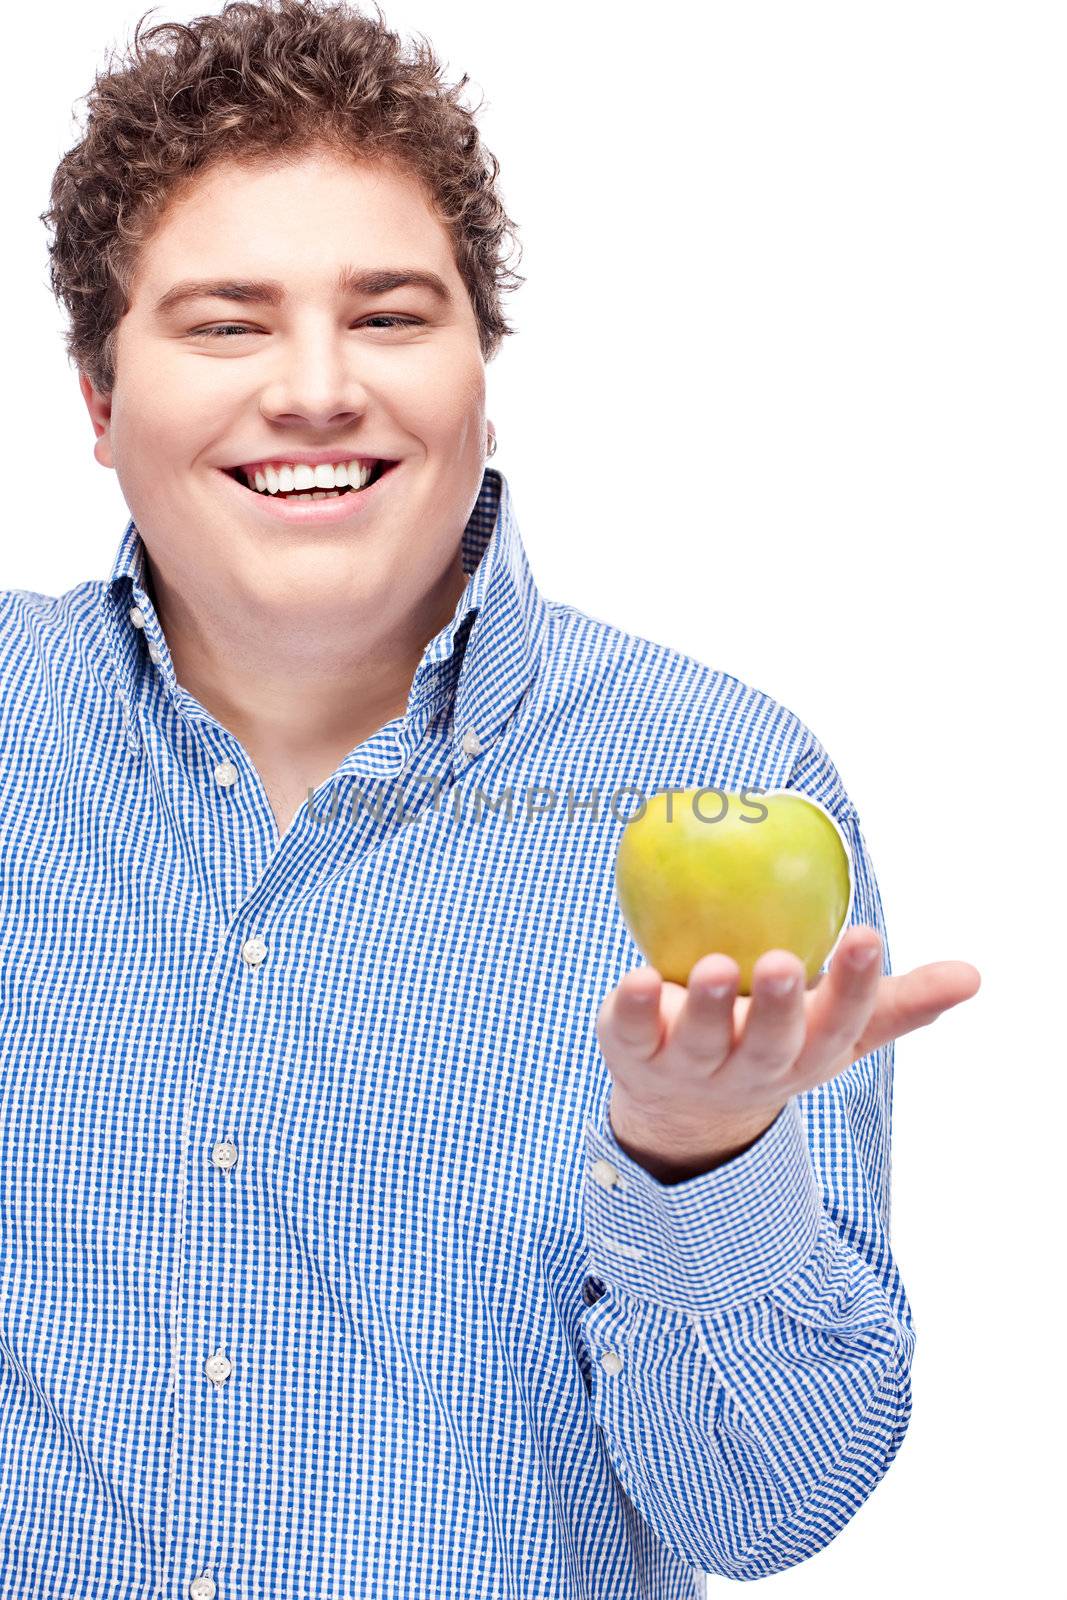 Happy chubby man holding apple, isolated on white